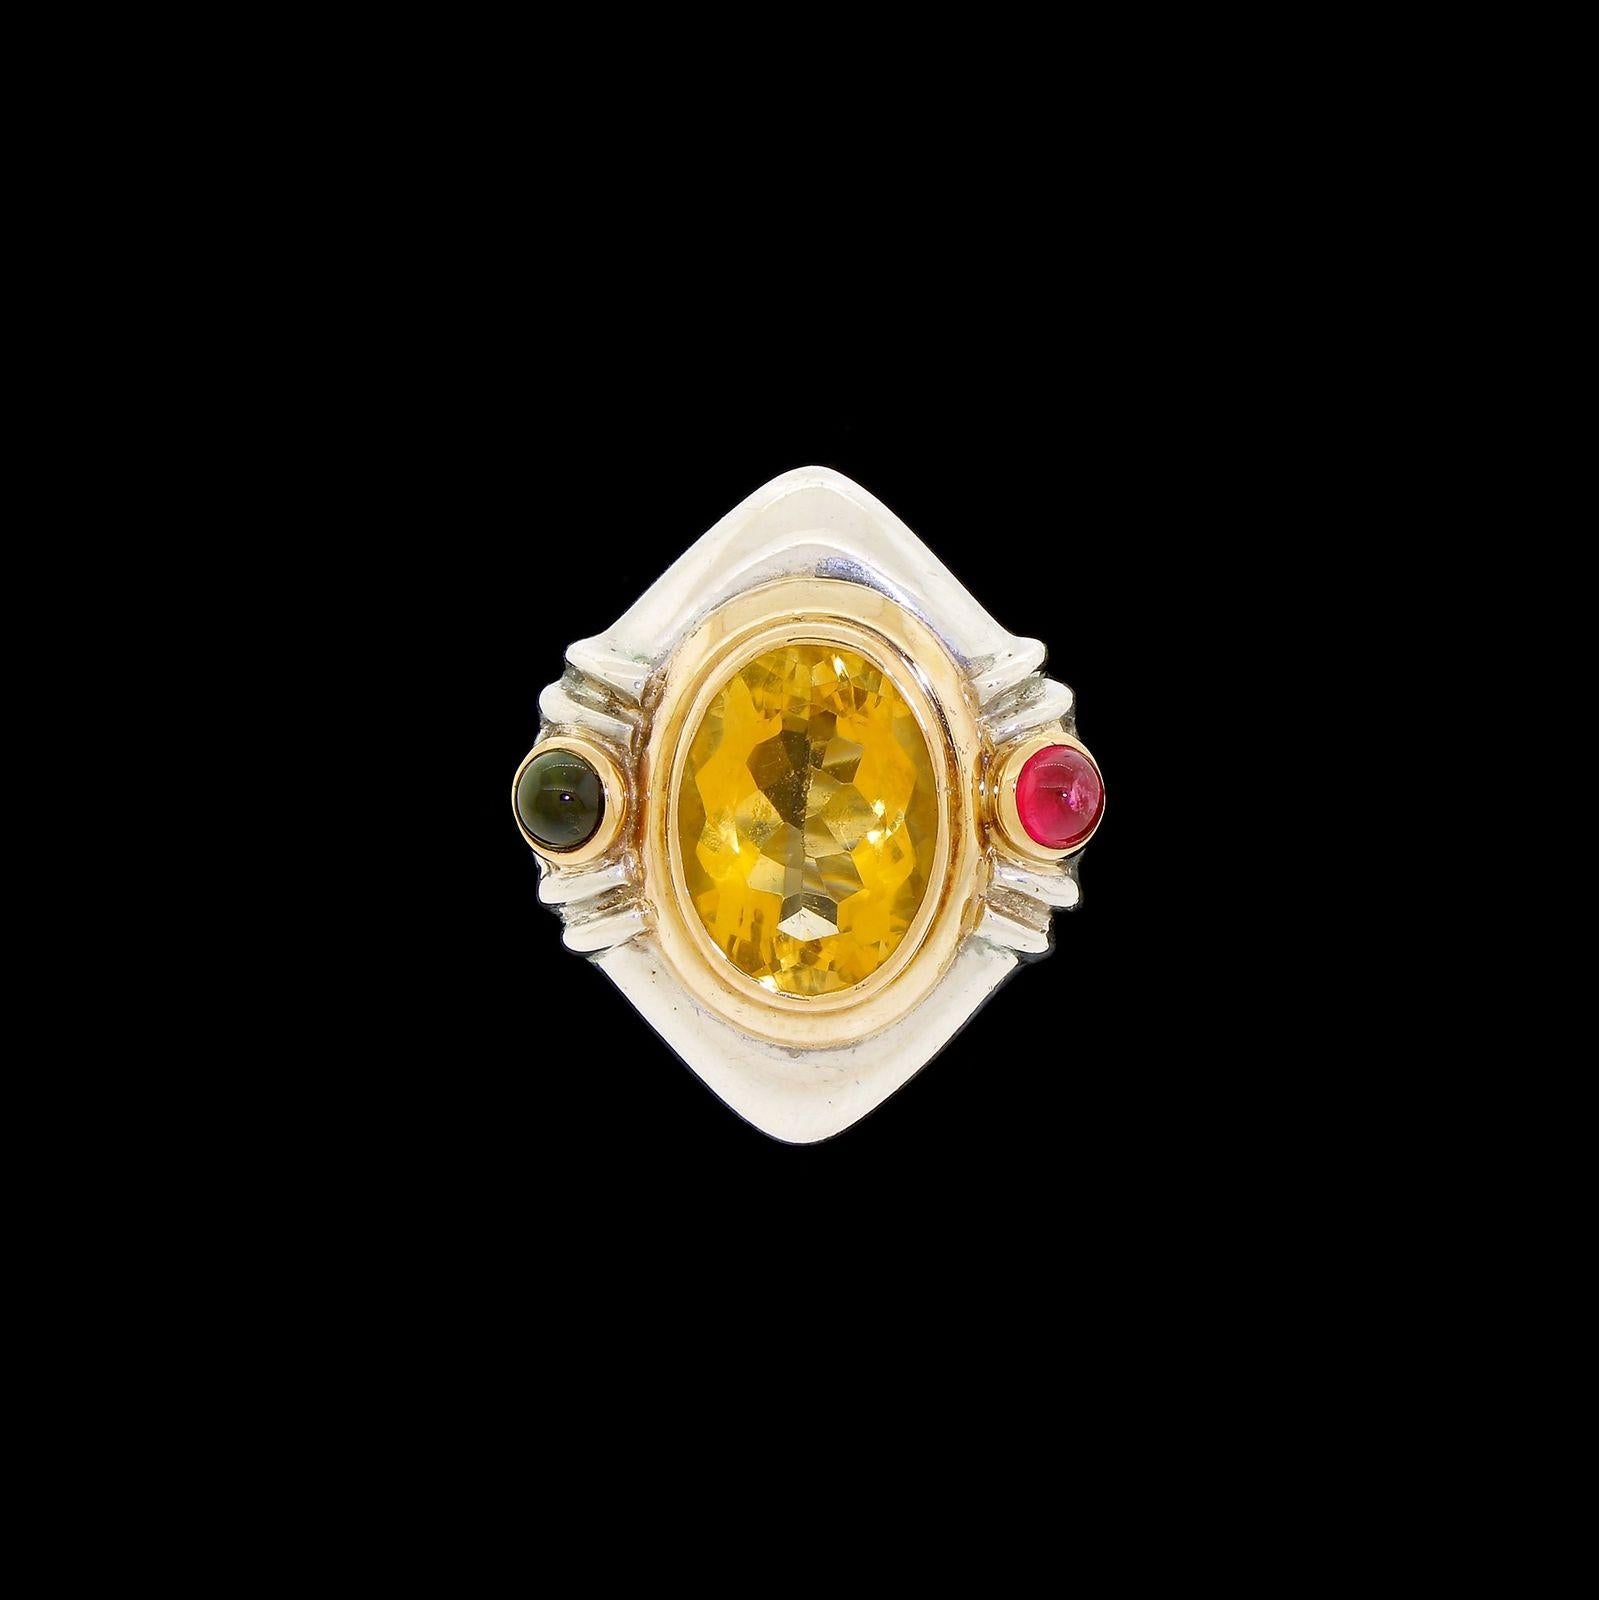 Modern Mazza Bartholome Sterling Silver 14k Gold Citrine Ring, Featured in Vogue 1989